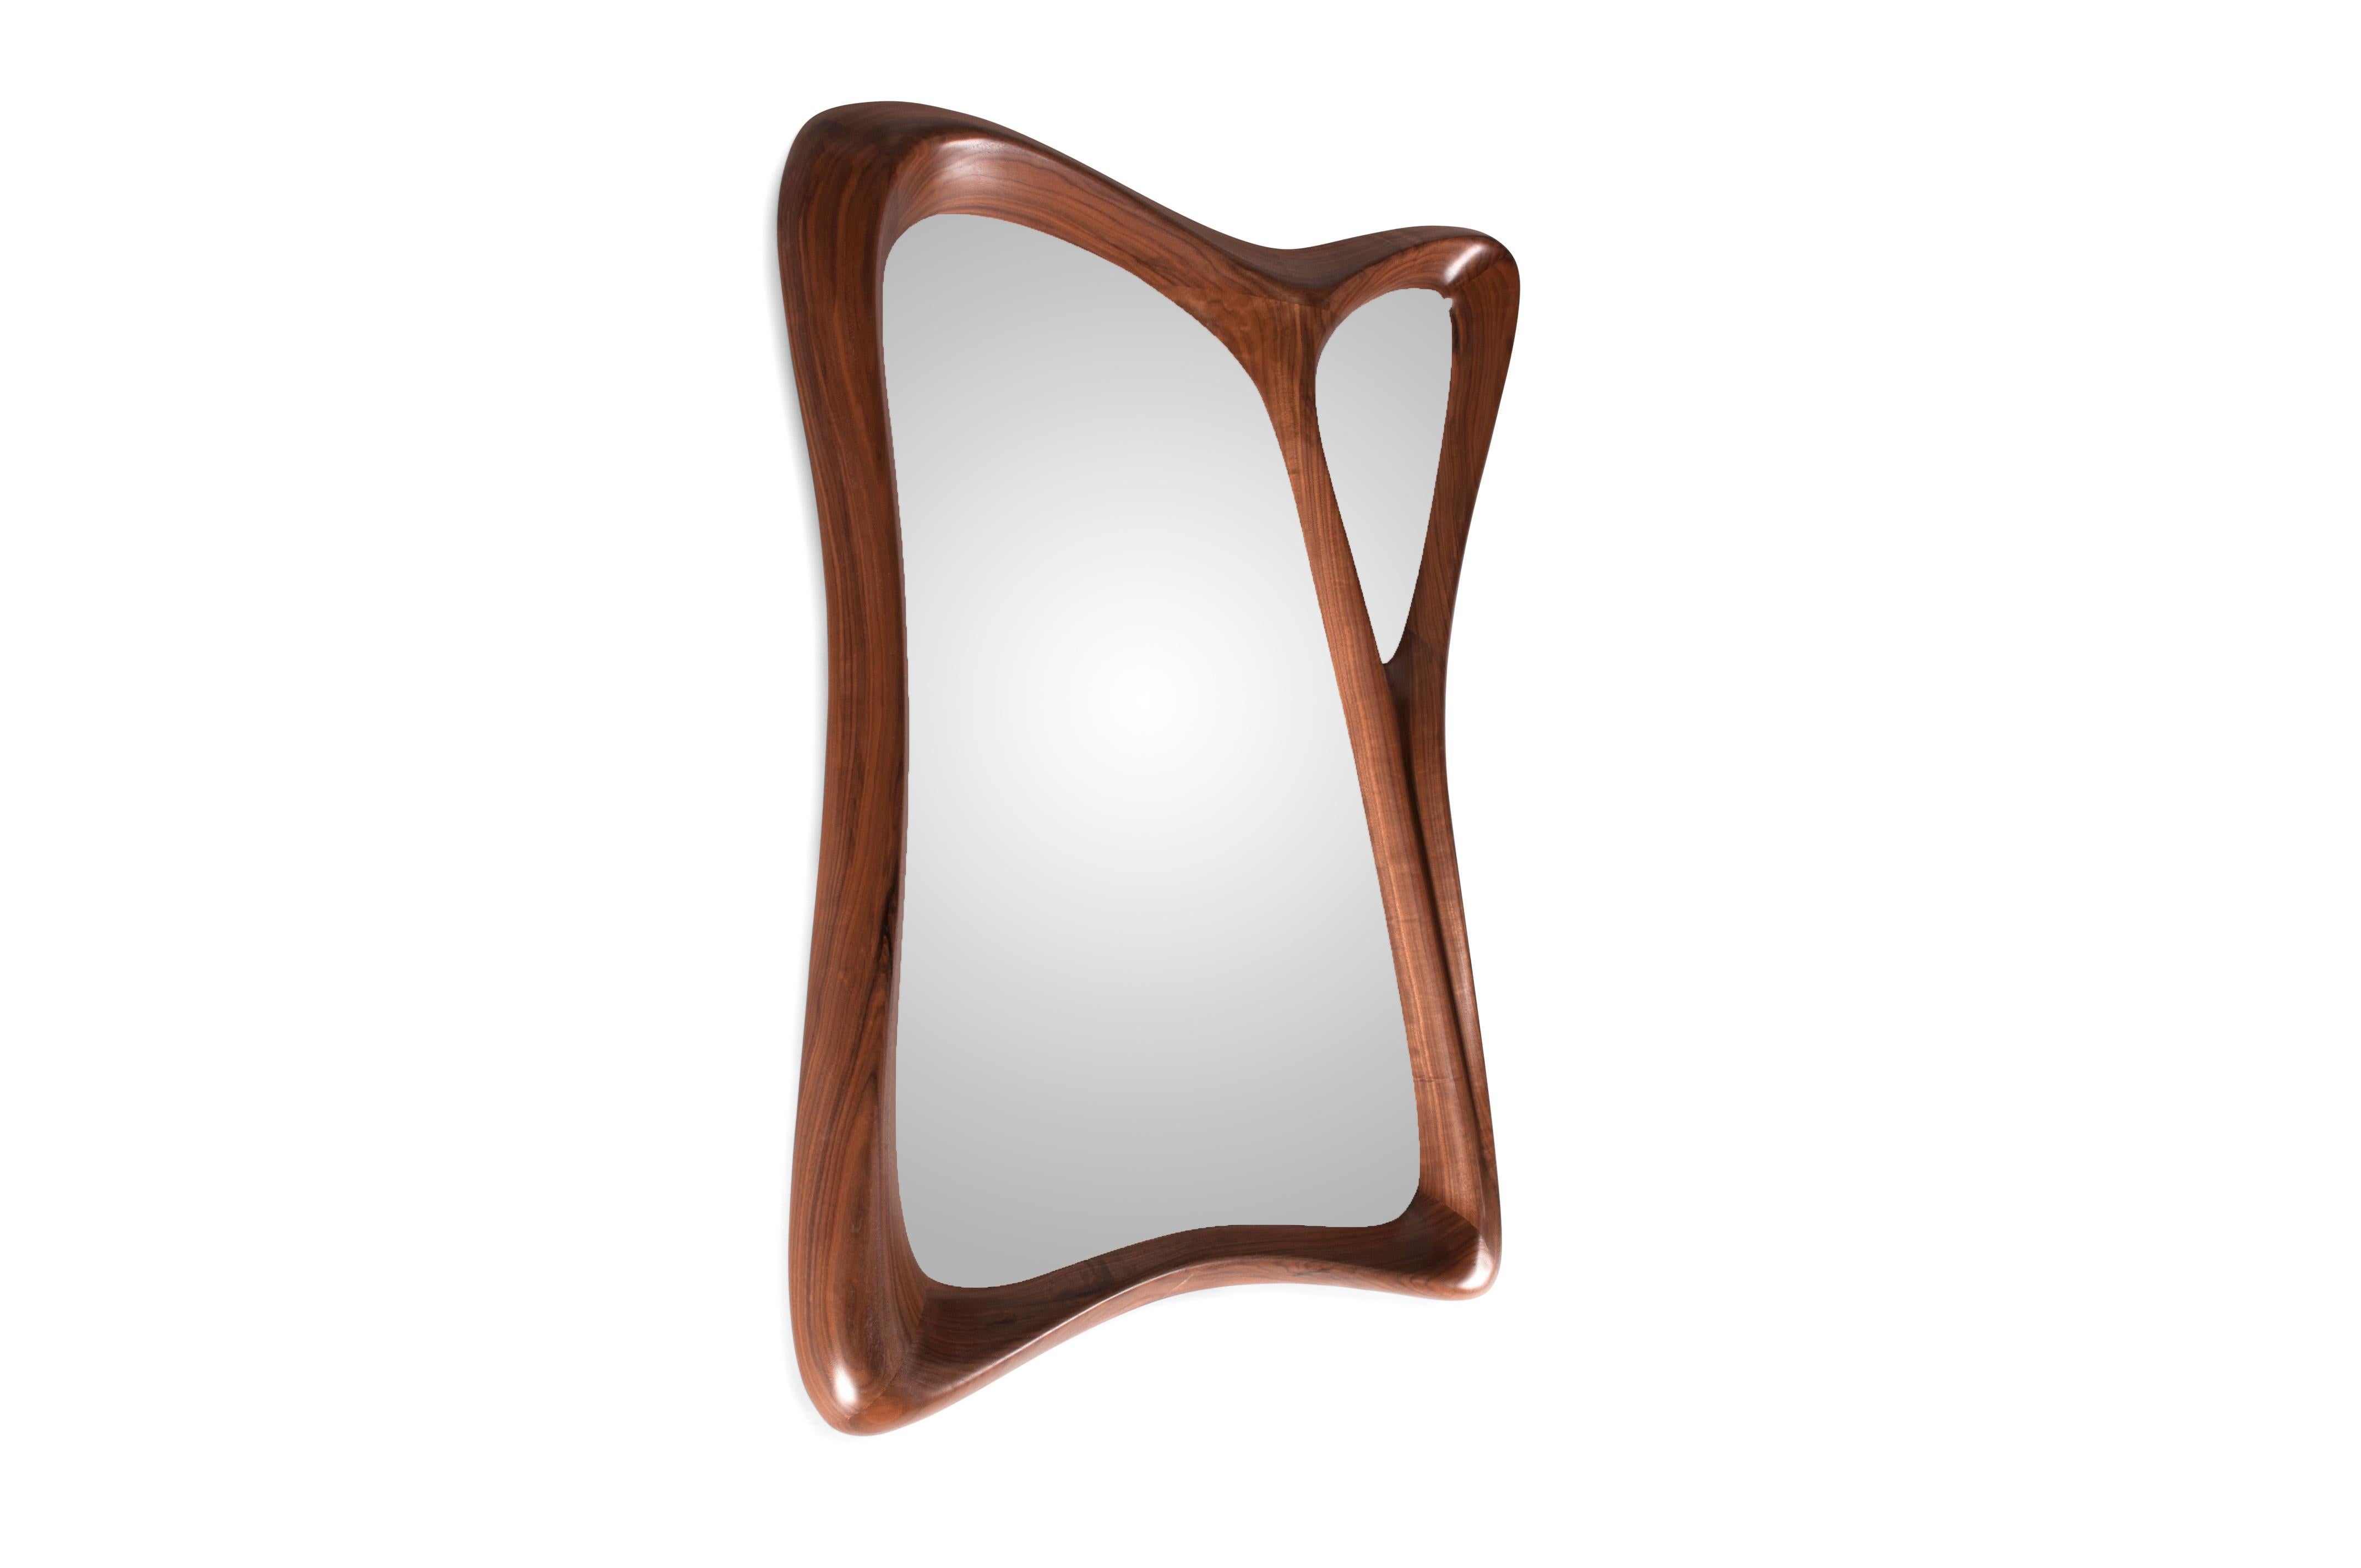 Carved Amorph Jolie Modern Wall Mounted Mirror Walnut Wood with Natural Stain For Sale